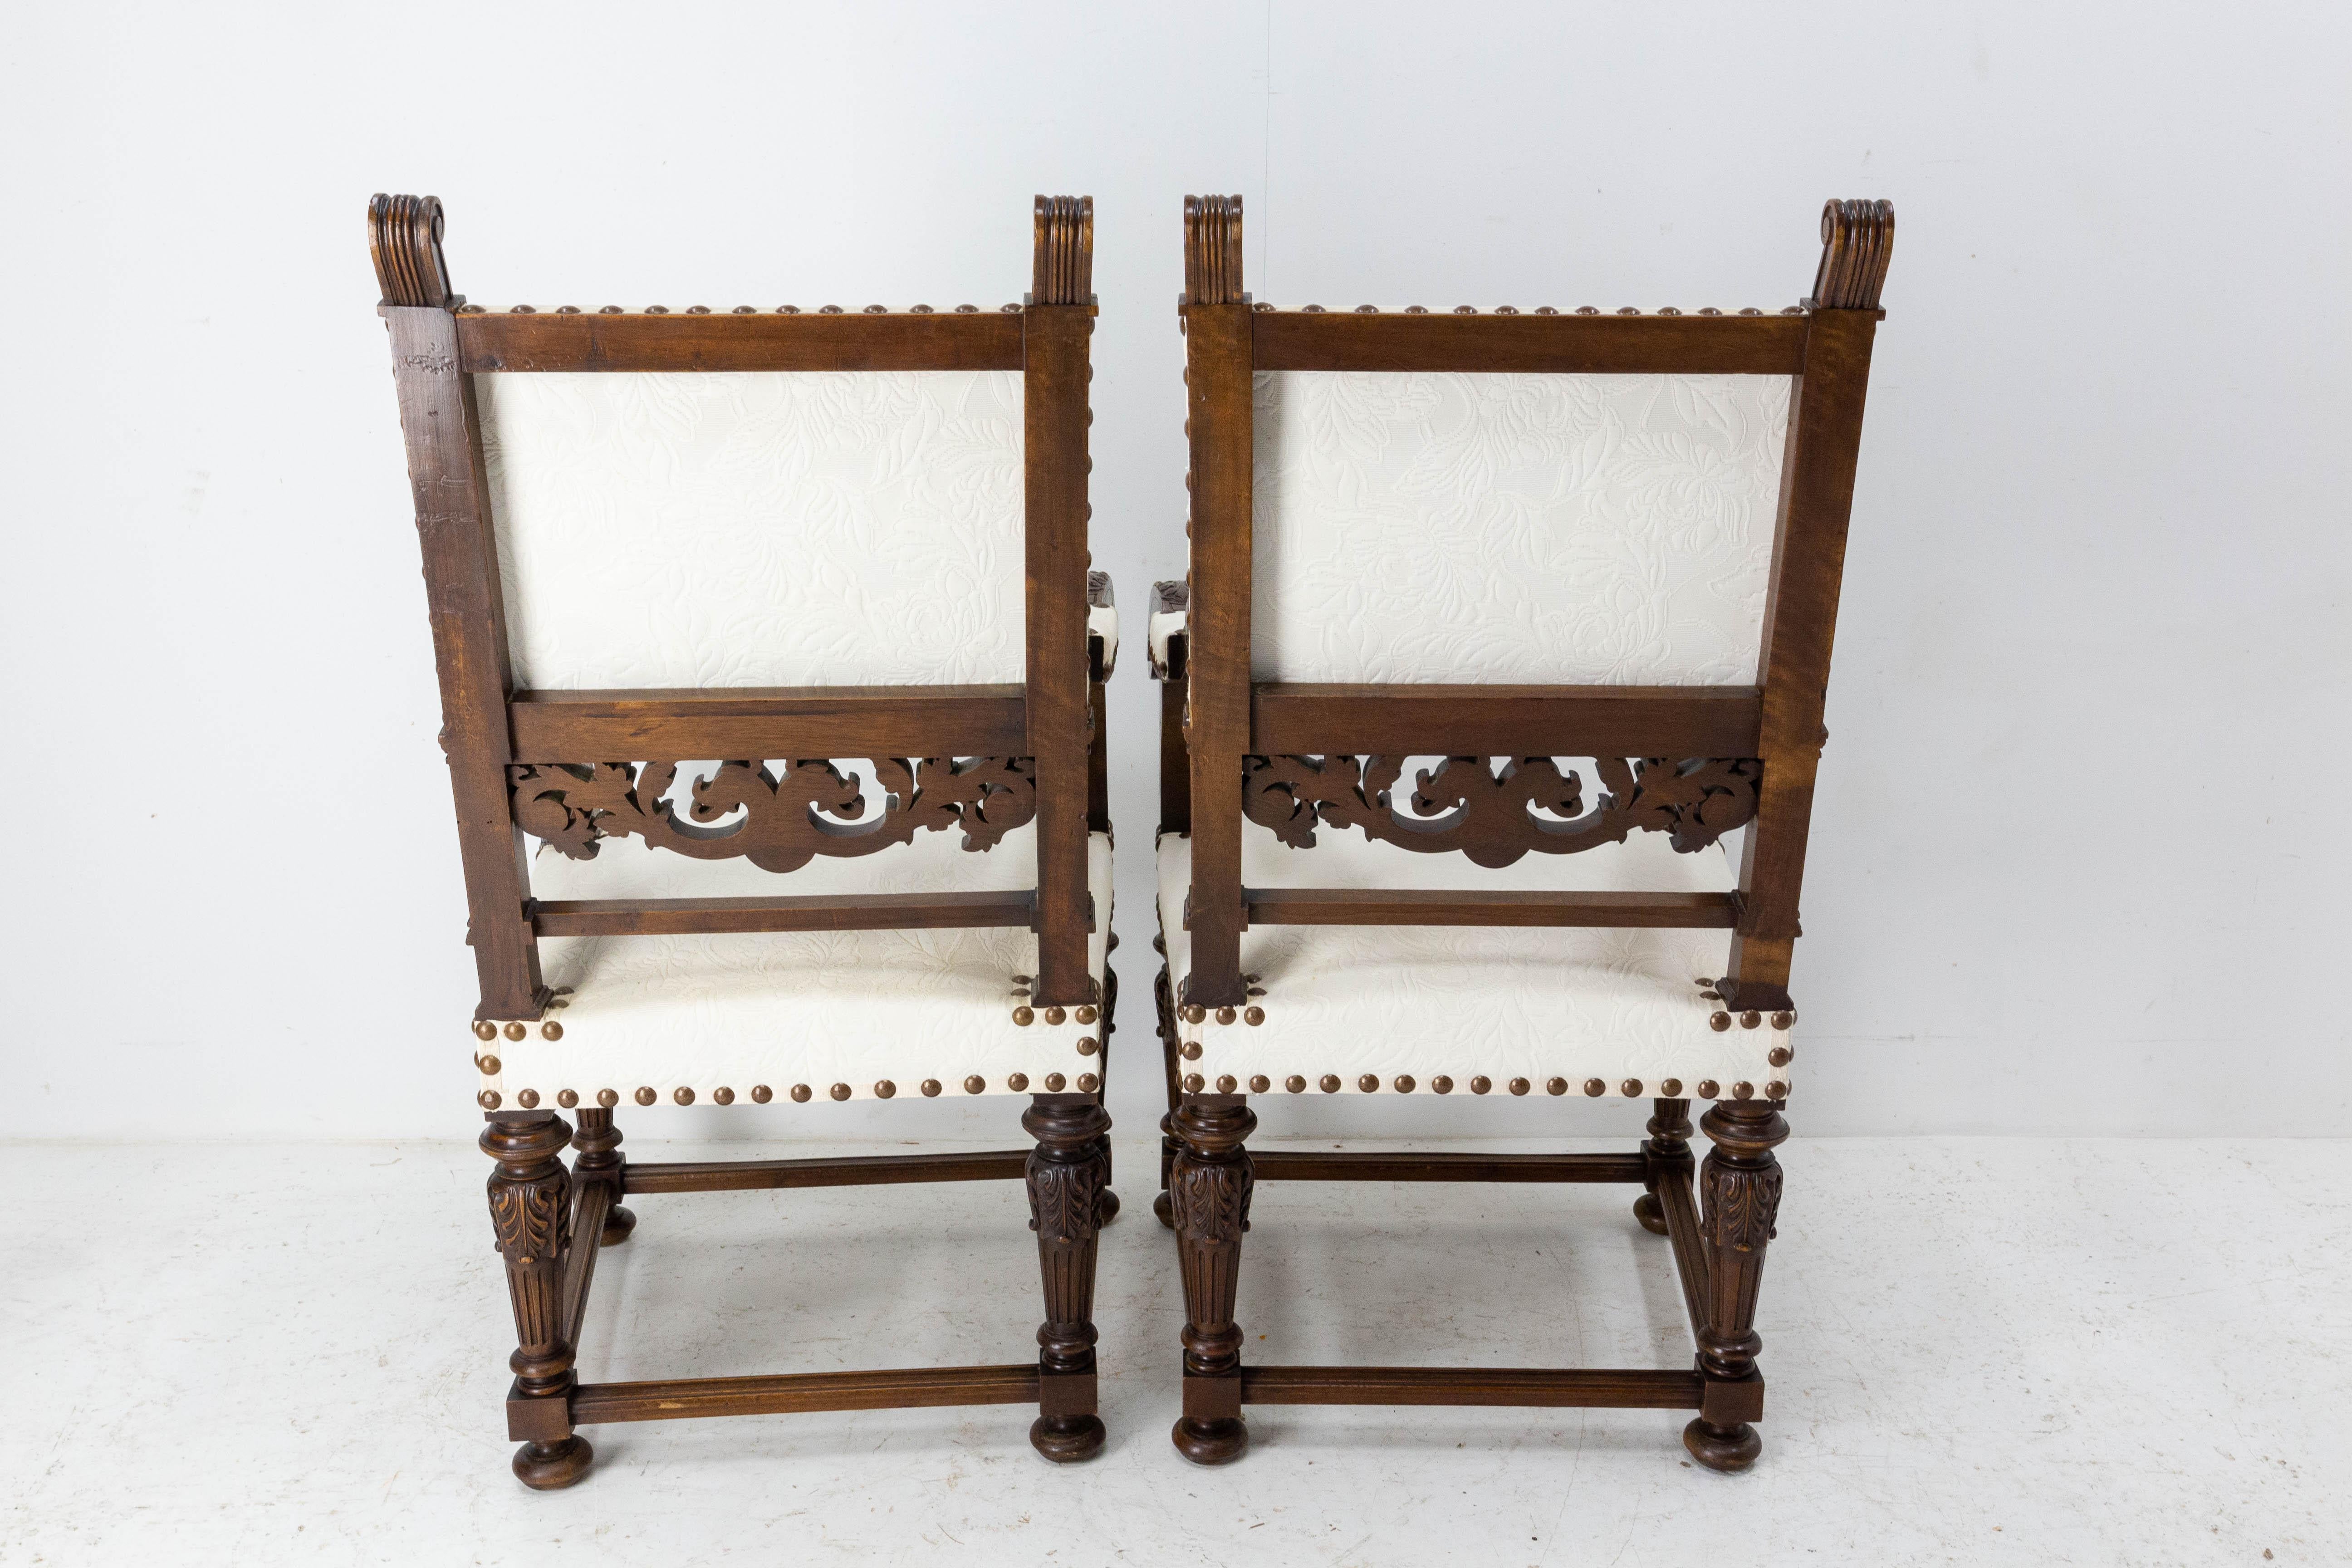 Pair of Louis XIII Revival Open Walnut Armchairs French, 19th Century to Recover For Sale 3